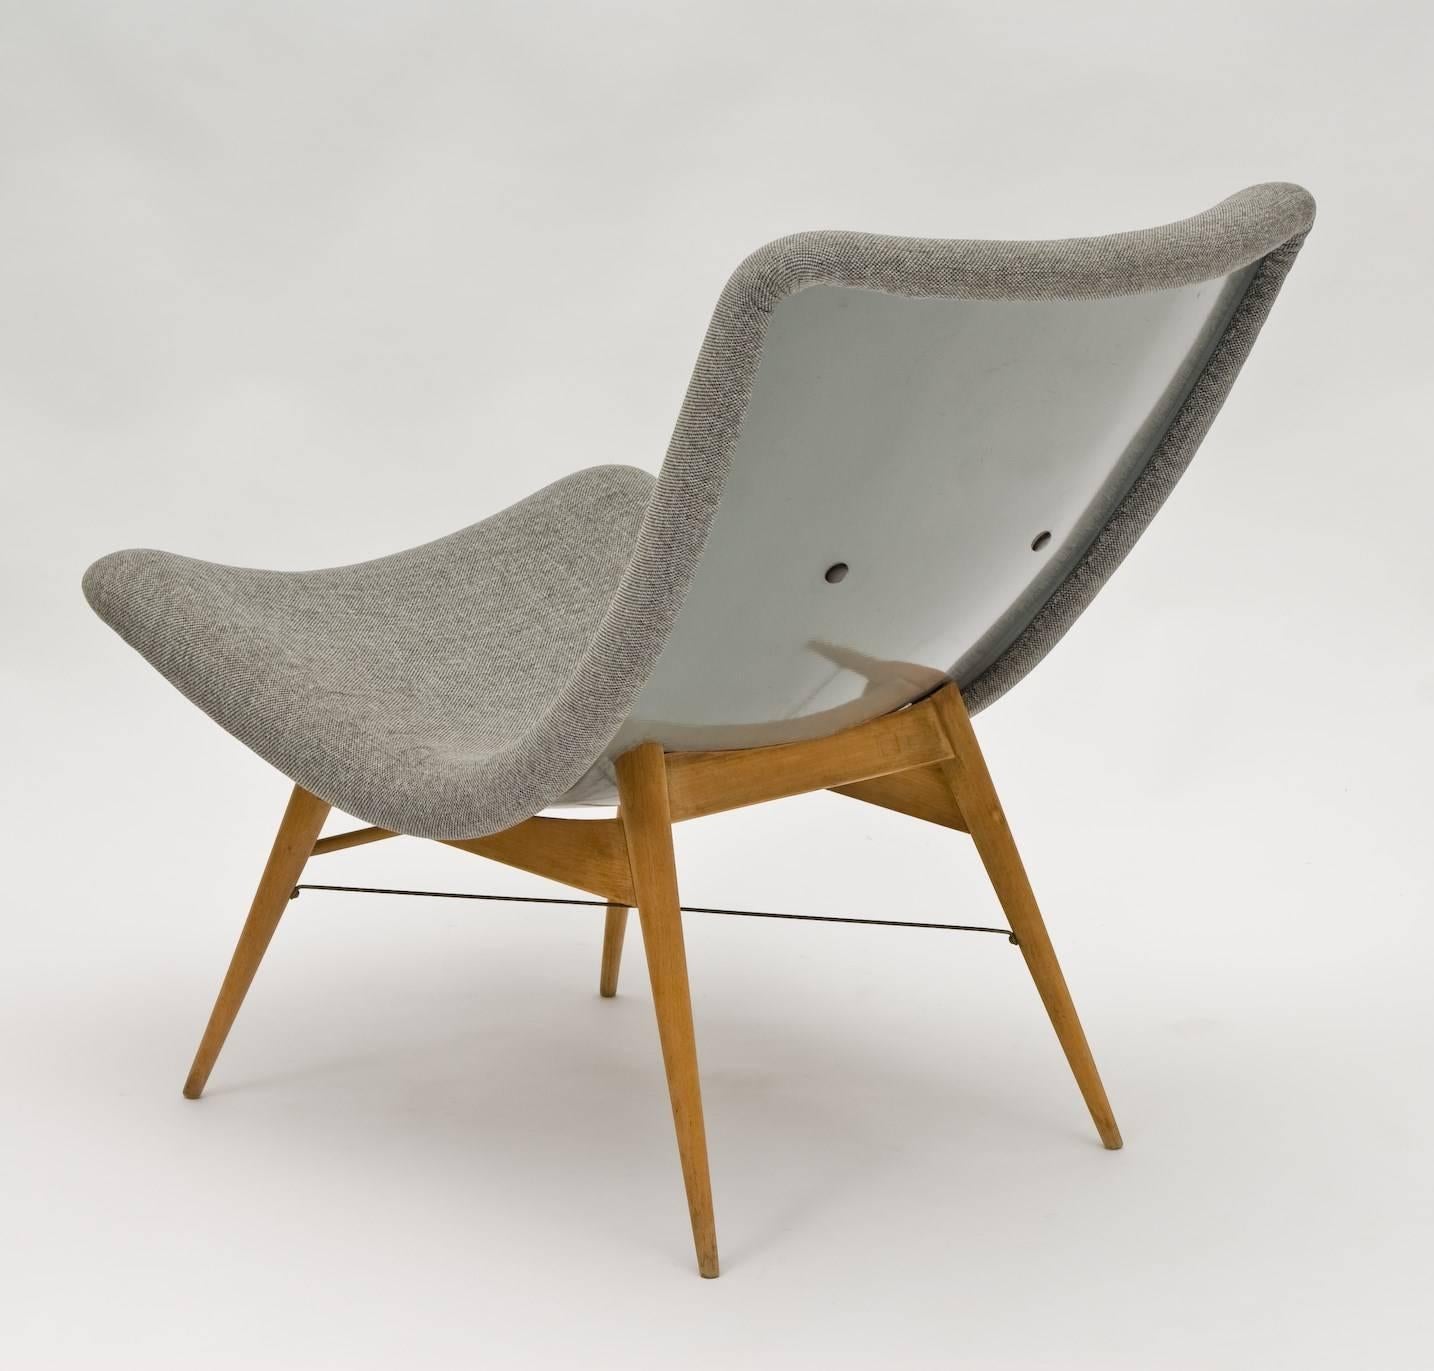 Stunning easy chair by Miroslav Navratil, manufactured  in Czech by Cesky Nabytek in 1959.

This iconic piece still has the original wooden base and a high quality fiberglass shell seating with grey fabric upholstery. It is an amazing piece of